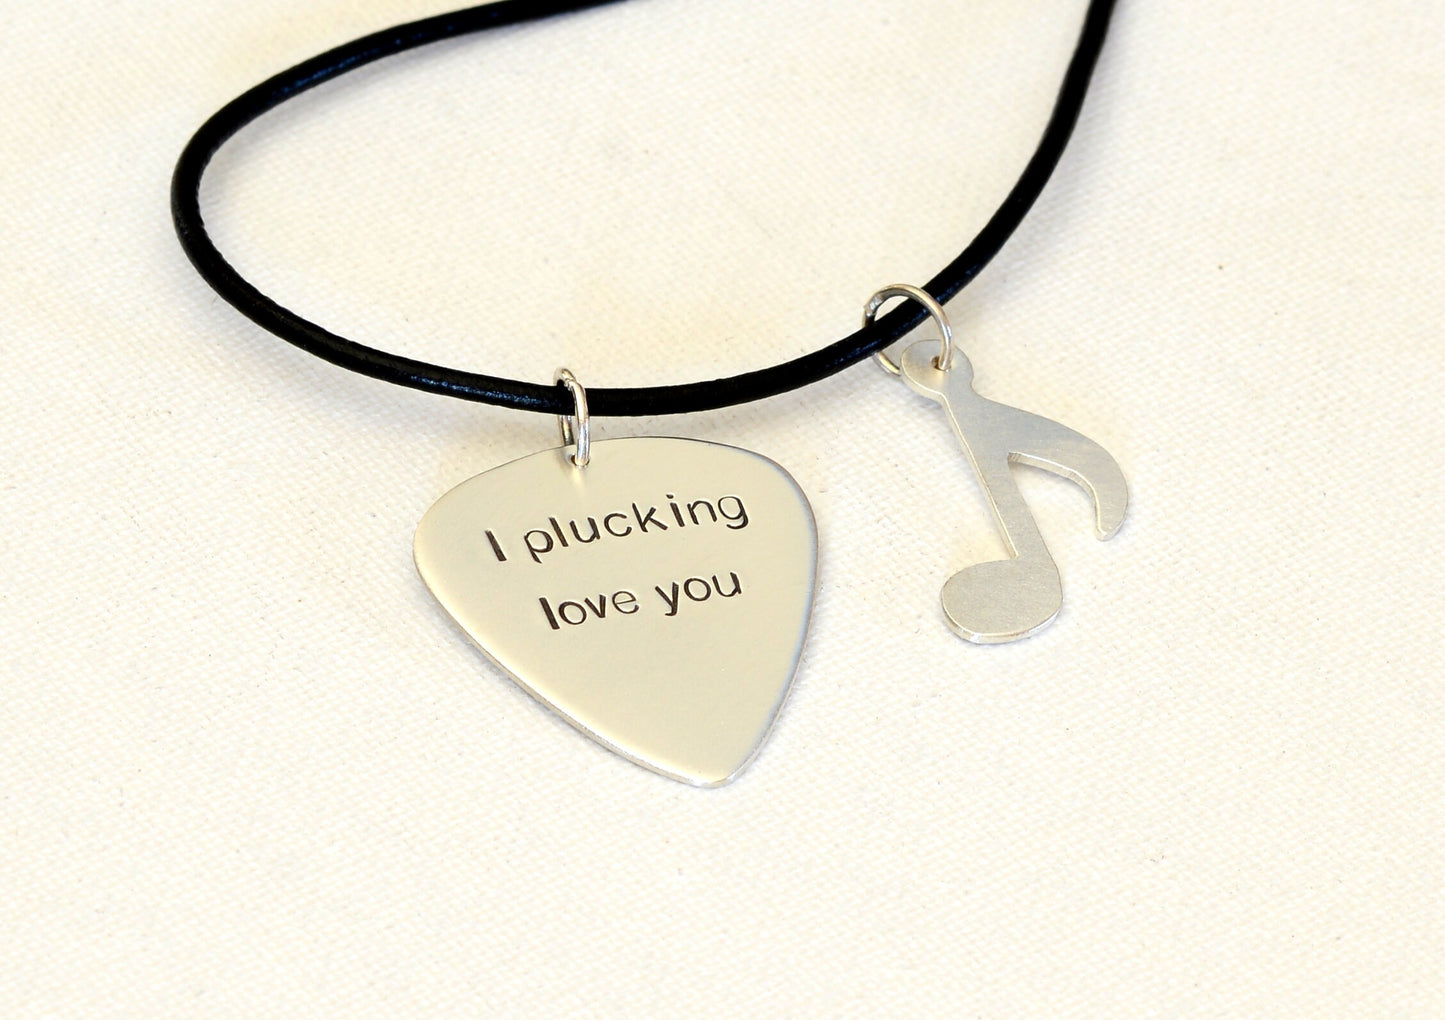 I plucking love you sterling silver guitar pick necklace